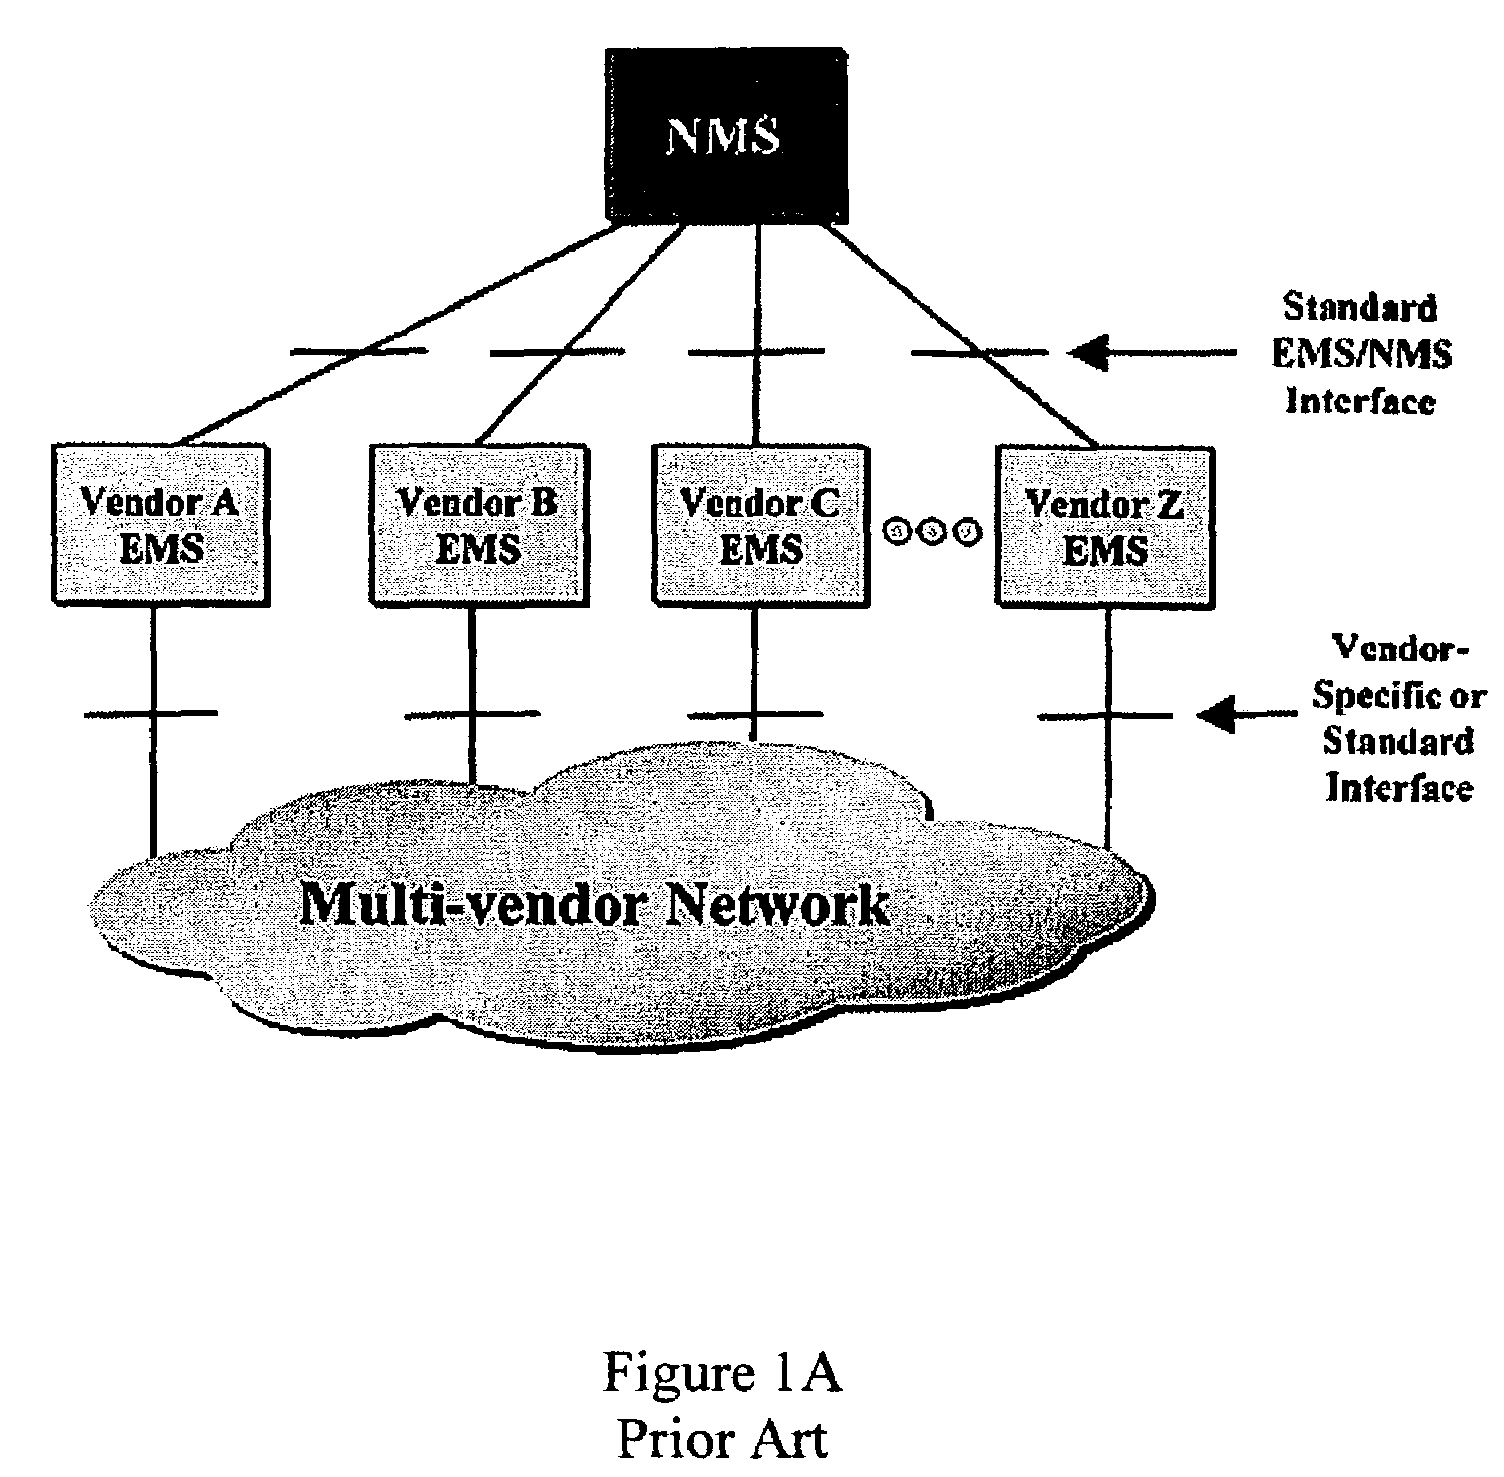 Element management system with data-driven interfacing driven by instantiation of meta-model